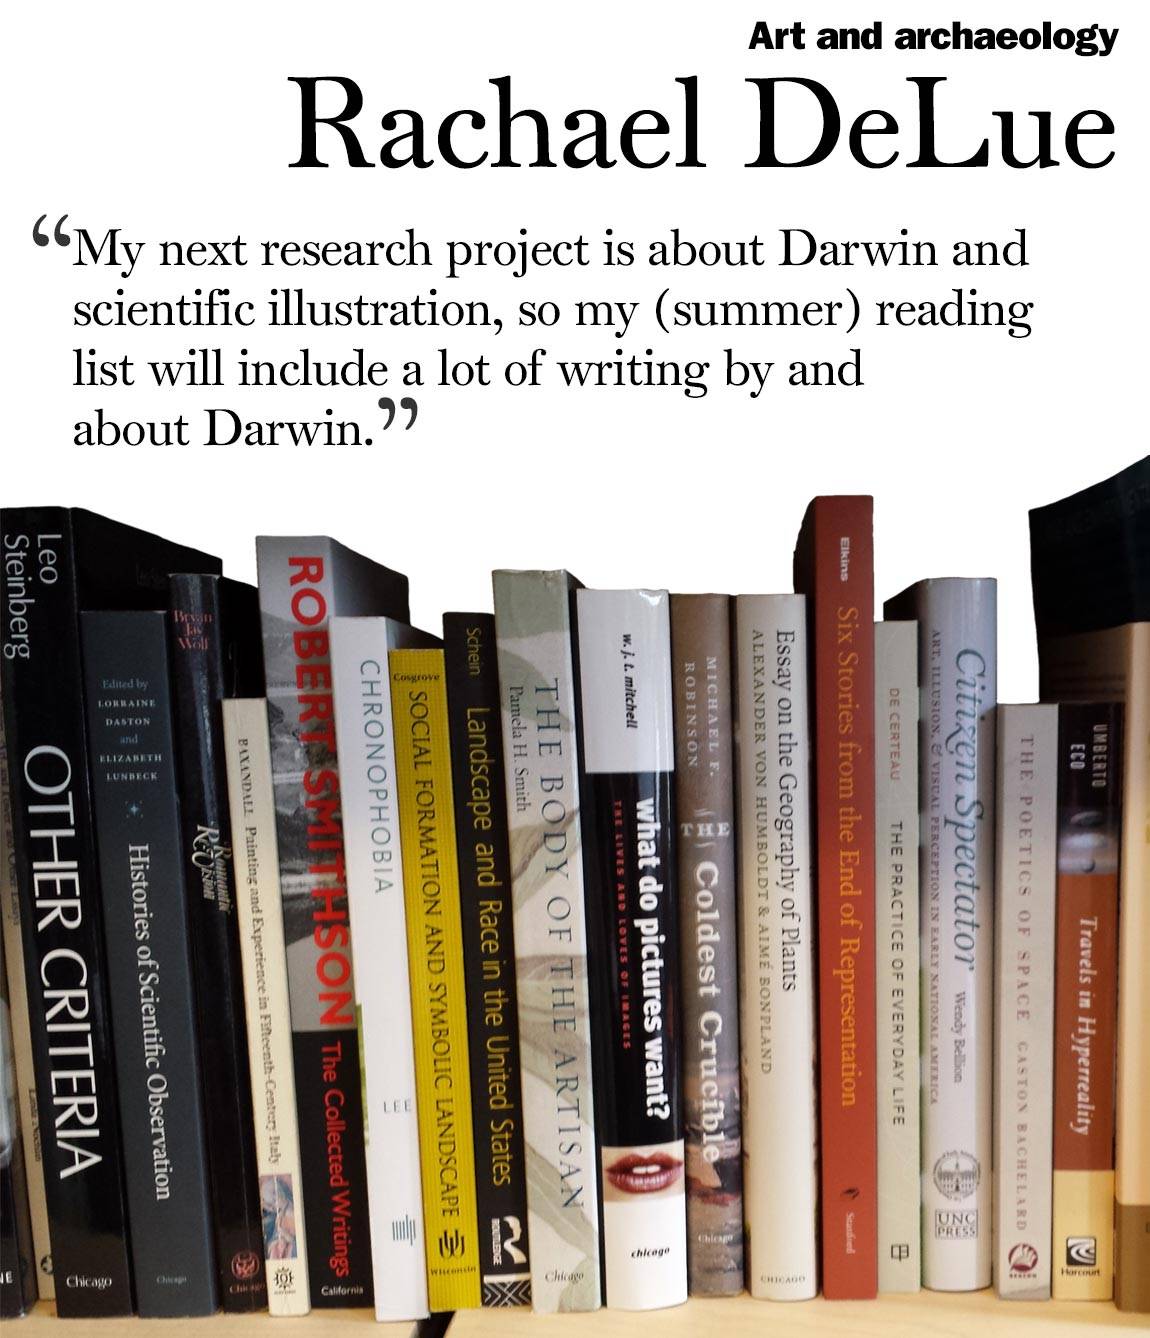 “My next research project is about Darwin and scientific illustration, so my (summer) reading  list will include a lot of writing by and  about Darwin.” Rachael DeLue, art and archaeology